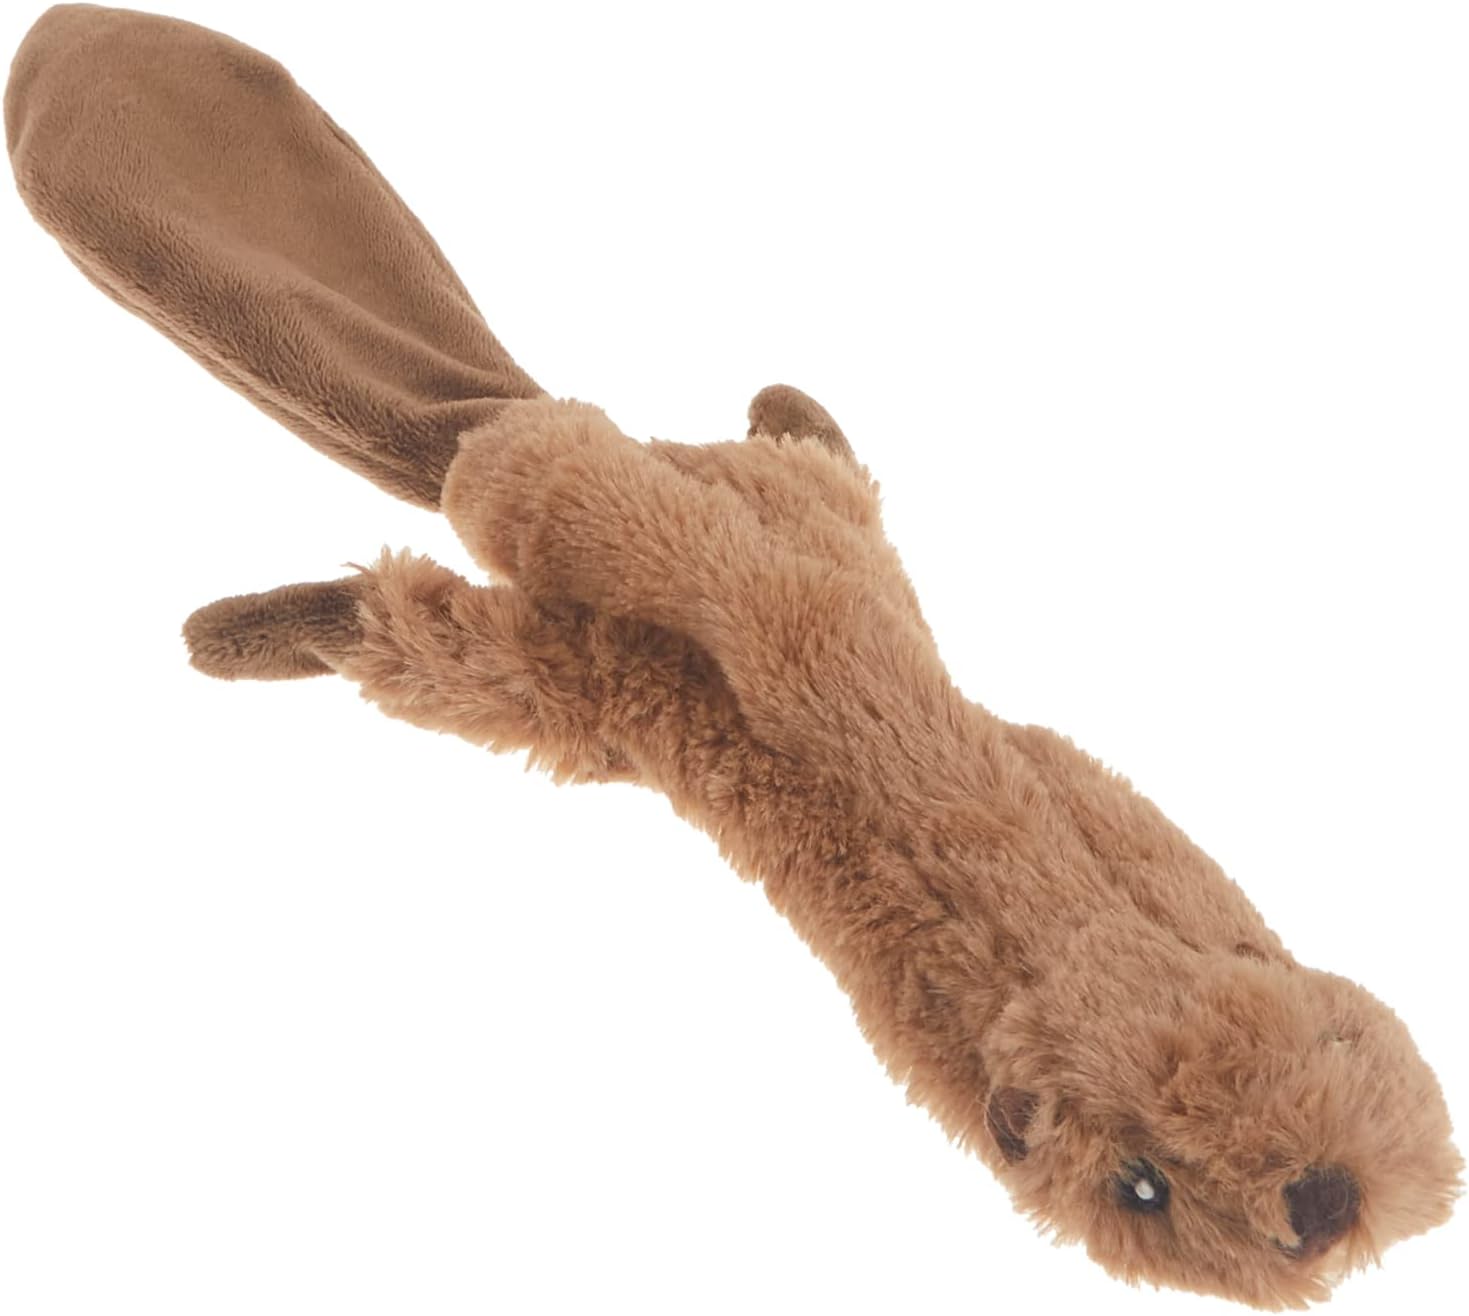 SPOT by Ethical Products Skinneeez-The Original Stuffless Stuffingless Dog Toys-Squeak Toys Tug Toy Small Dogs and Large Dogs Puppy Chew Toy Alternative Interactive Dog Toy-Flying Squirrel-Small